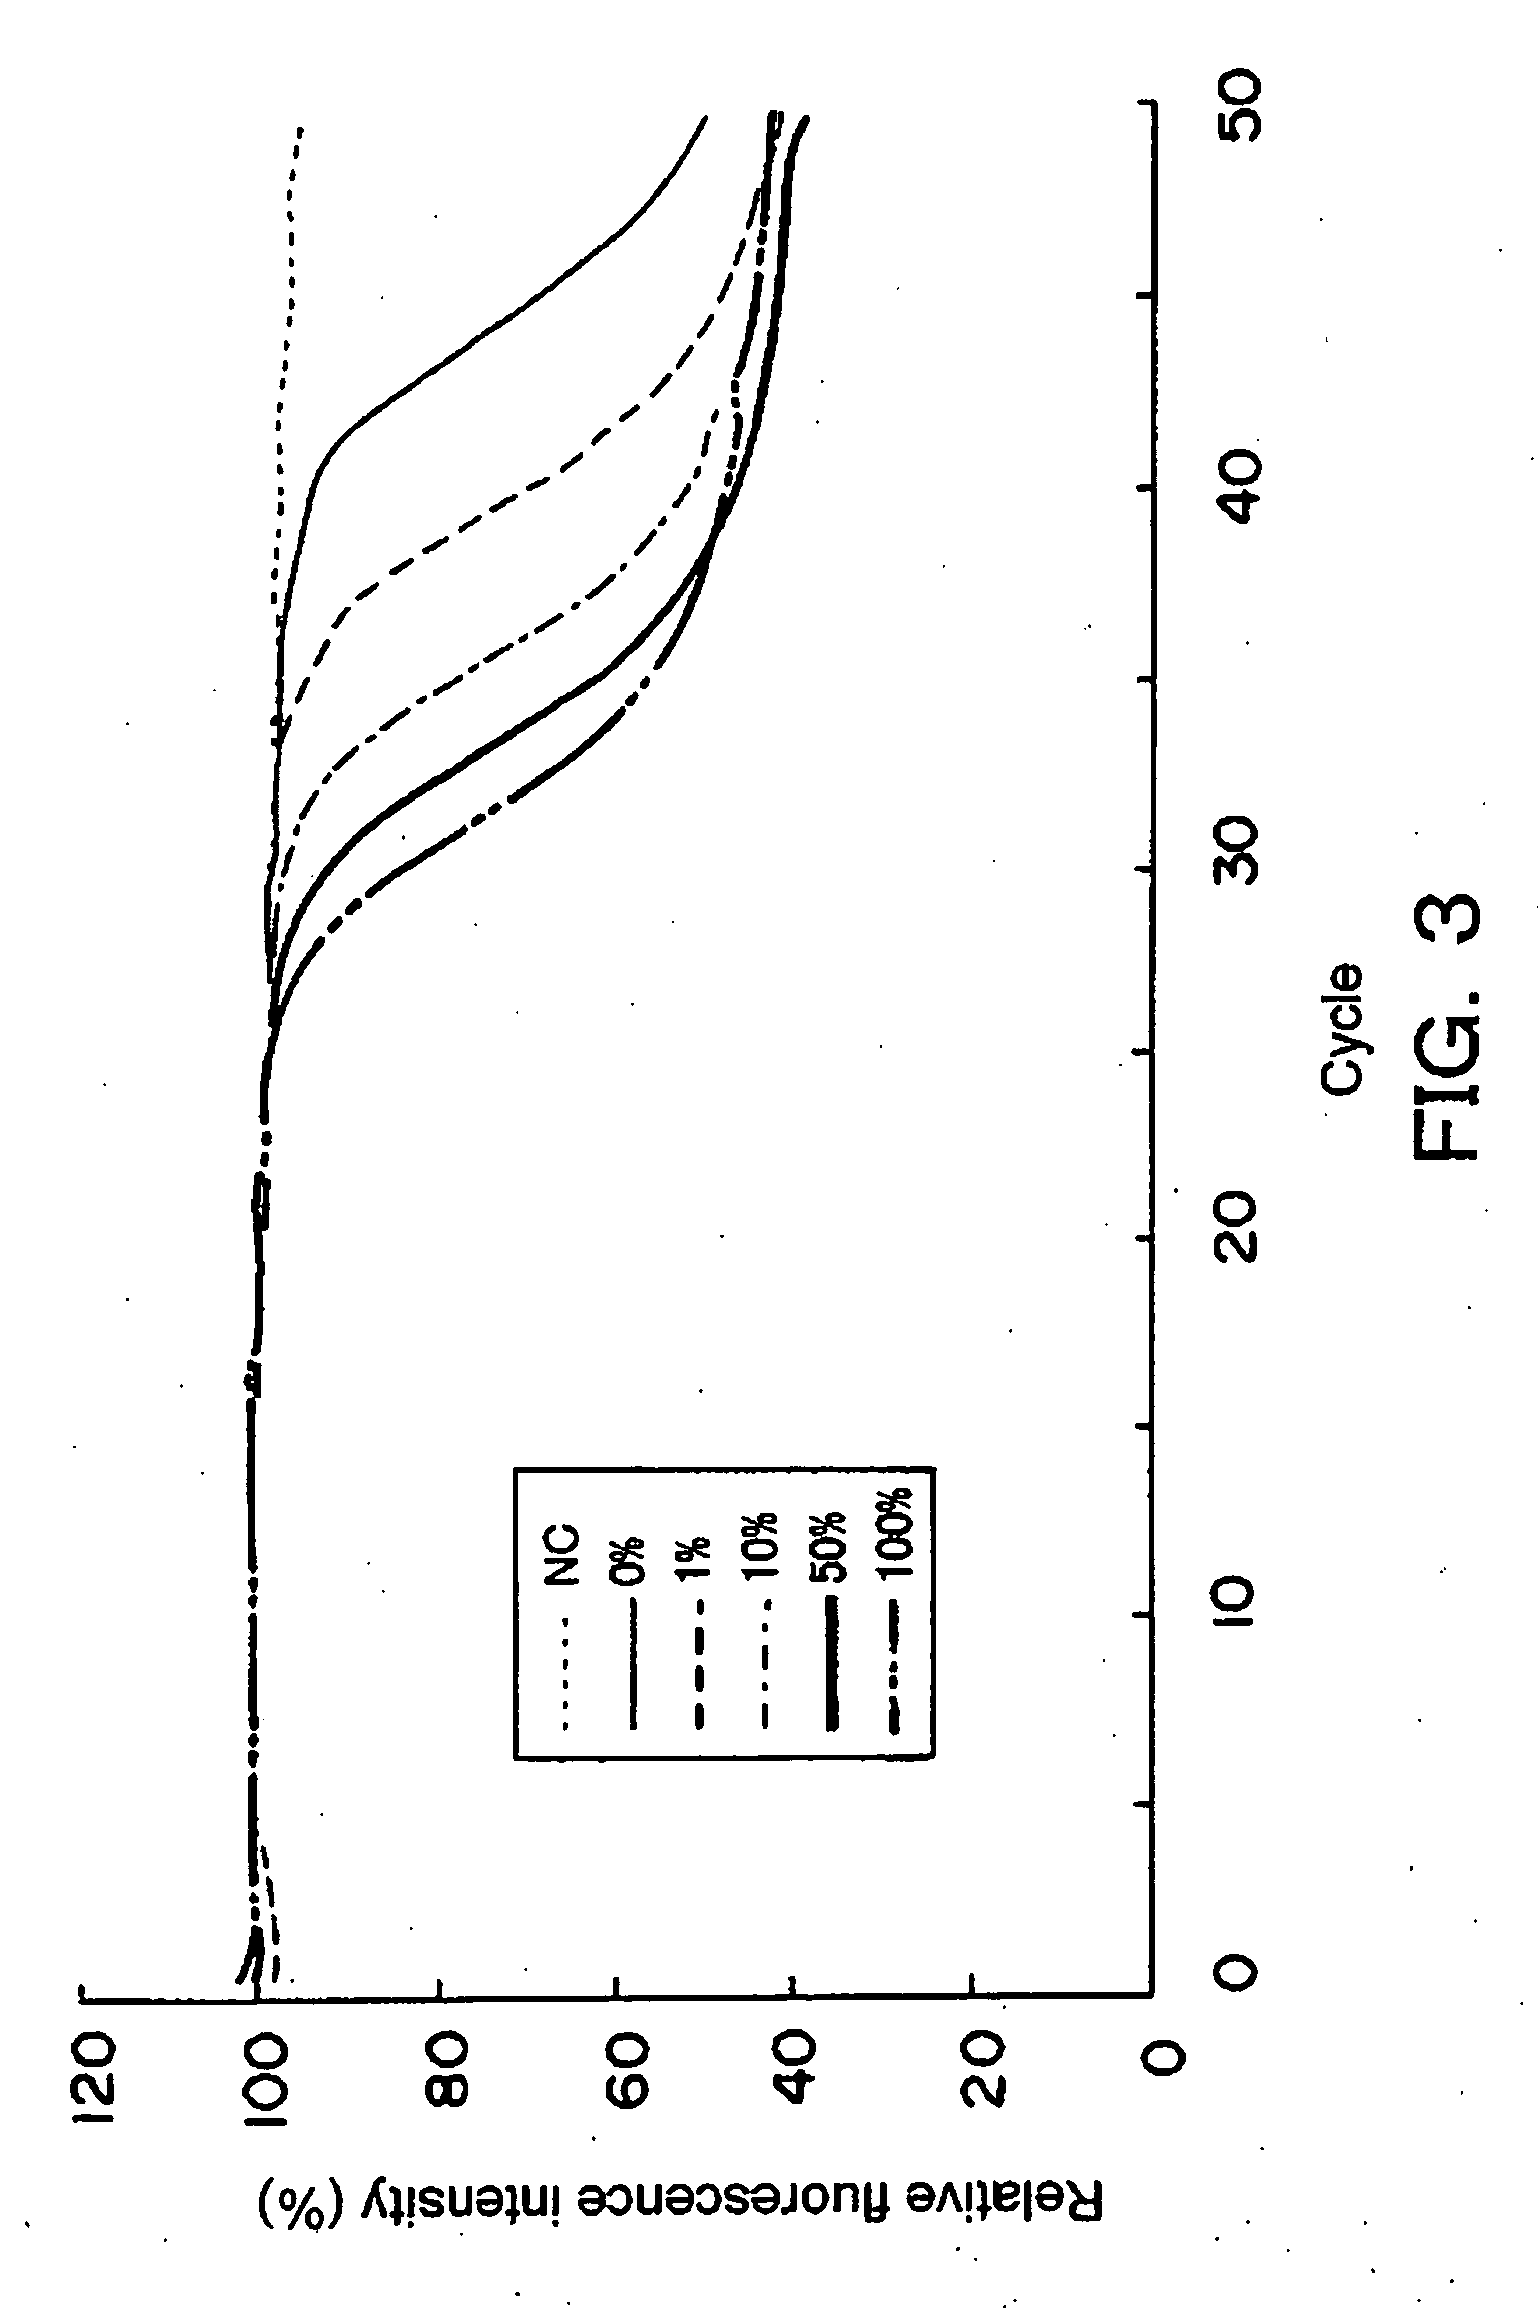 Method of detecting or quantitatively determining mitochondrial dna 3243 variation, and kit therefor